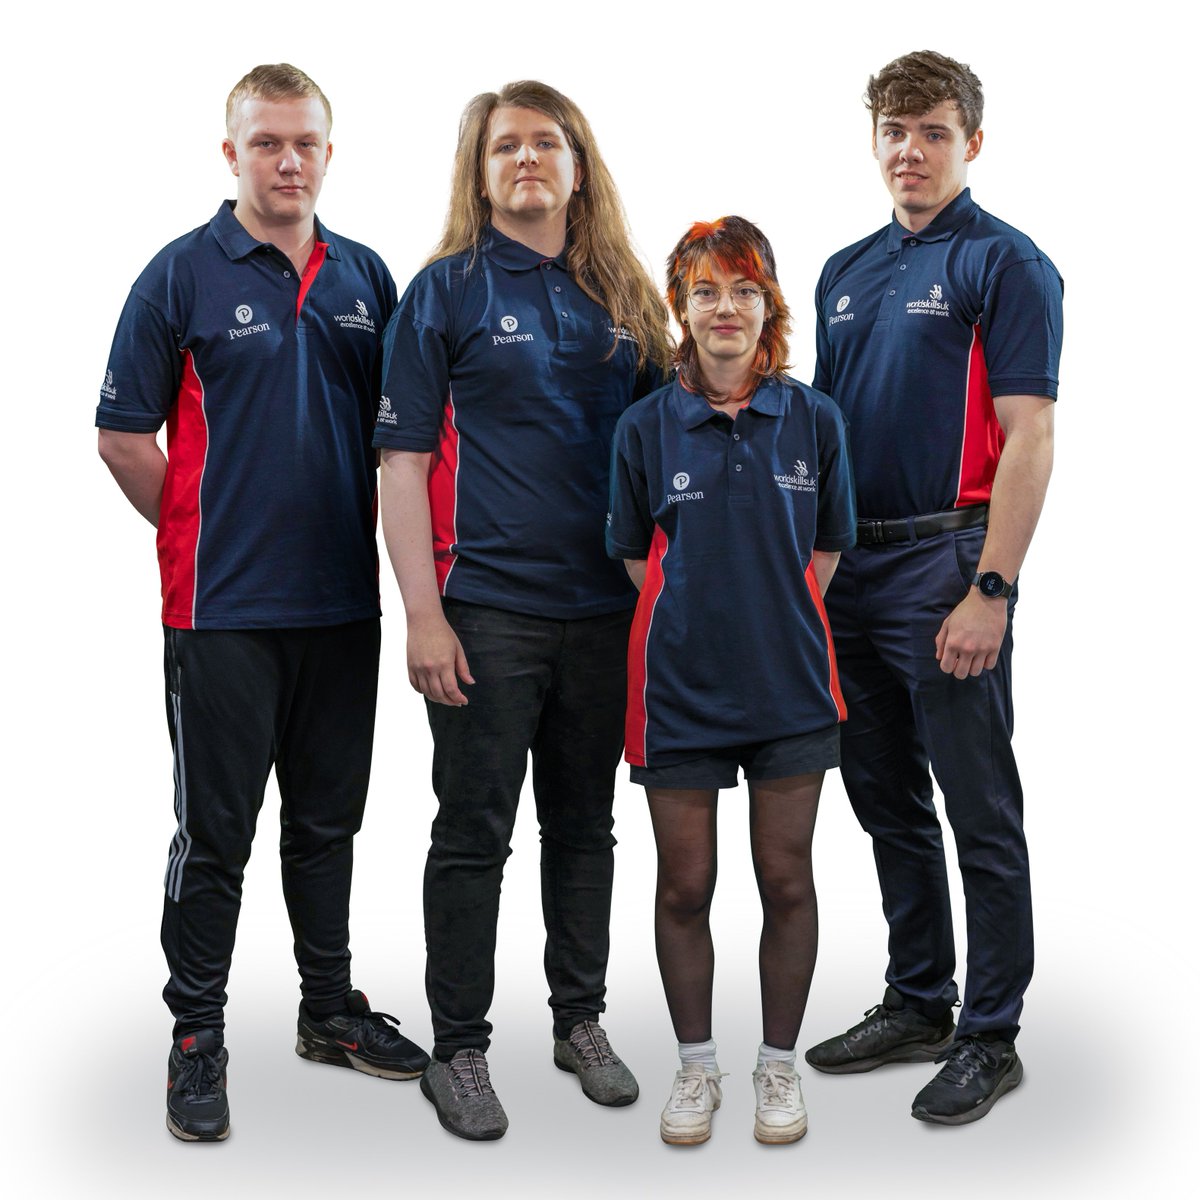 Four Scots are amongst the Team UK competitors announced today by @worldskillsuk for this year’s @WorldSkills2024 international competition in France. We wish them and the whole of Team UK the very best of luck #WSC2024 tinyurl.com/2vncwk7a